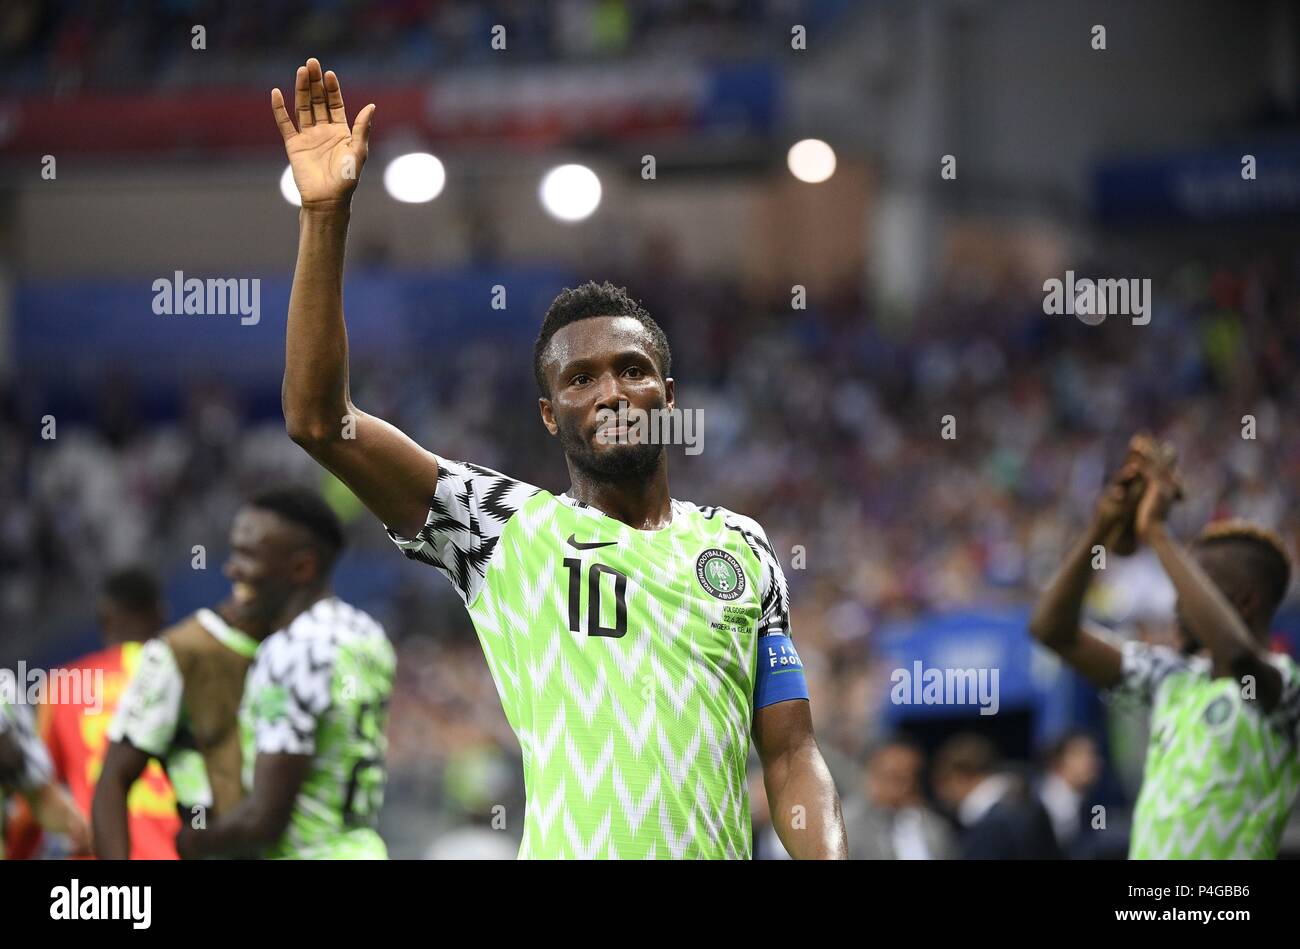 Volgograd, Russia. 22nd June, 2018. John Obi Mikel of Nigeria greets the audience after the 2018 FIFA World Cup Group D match between Nigeria and Iceland in Volgograd, Russia, June 22, 2018. Nigeria won 2-0. Credit: Lui Siu Wai/Xinhua/Alamy Live News Stock Photo